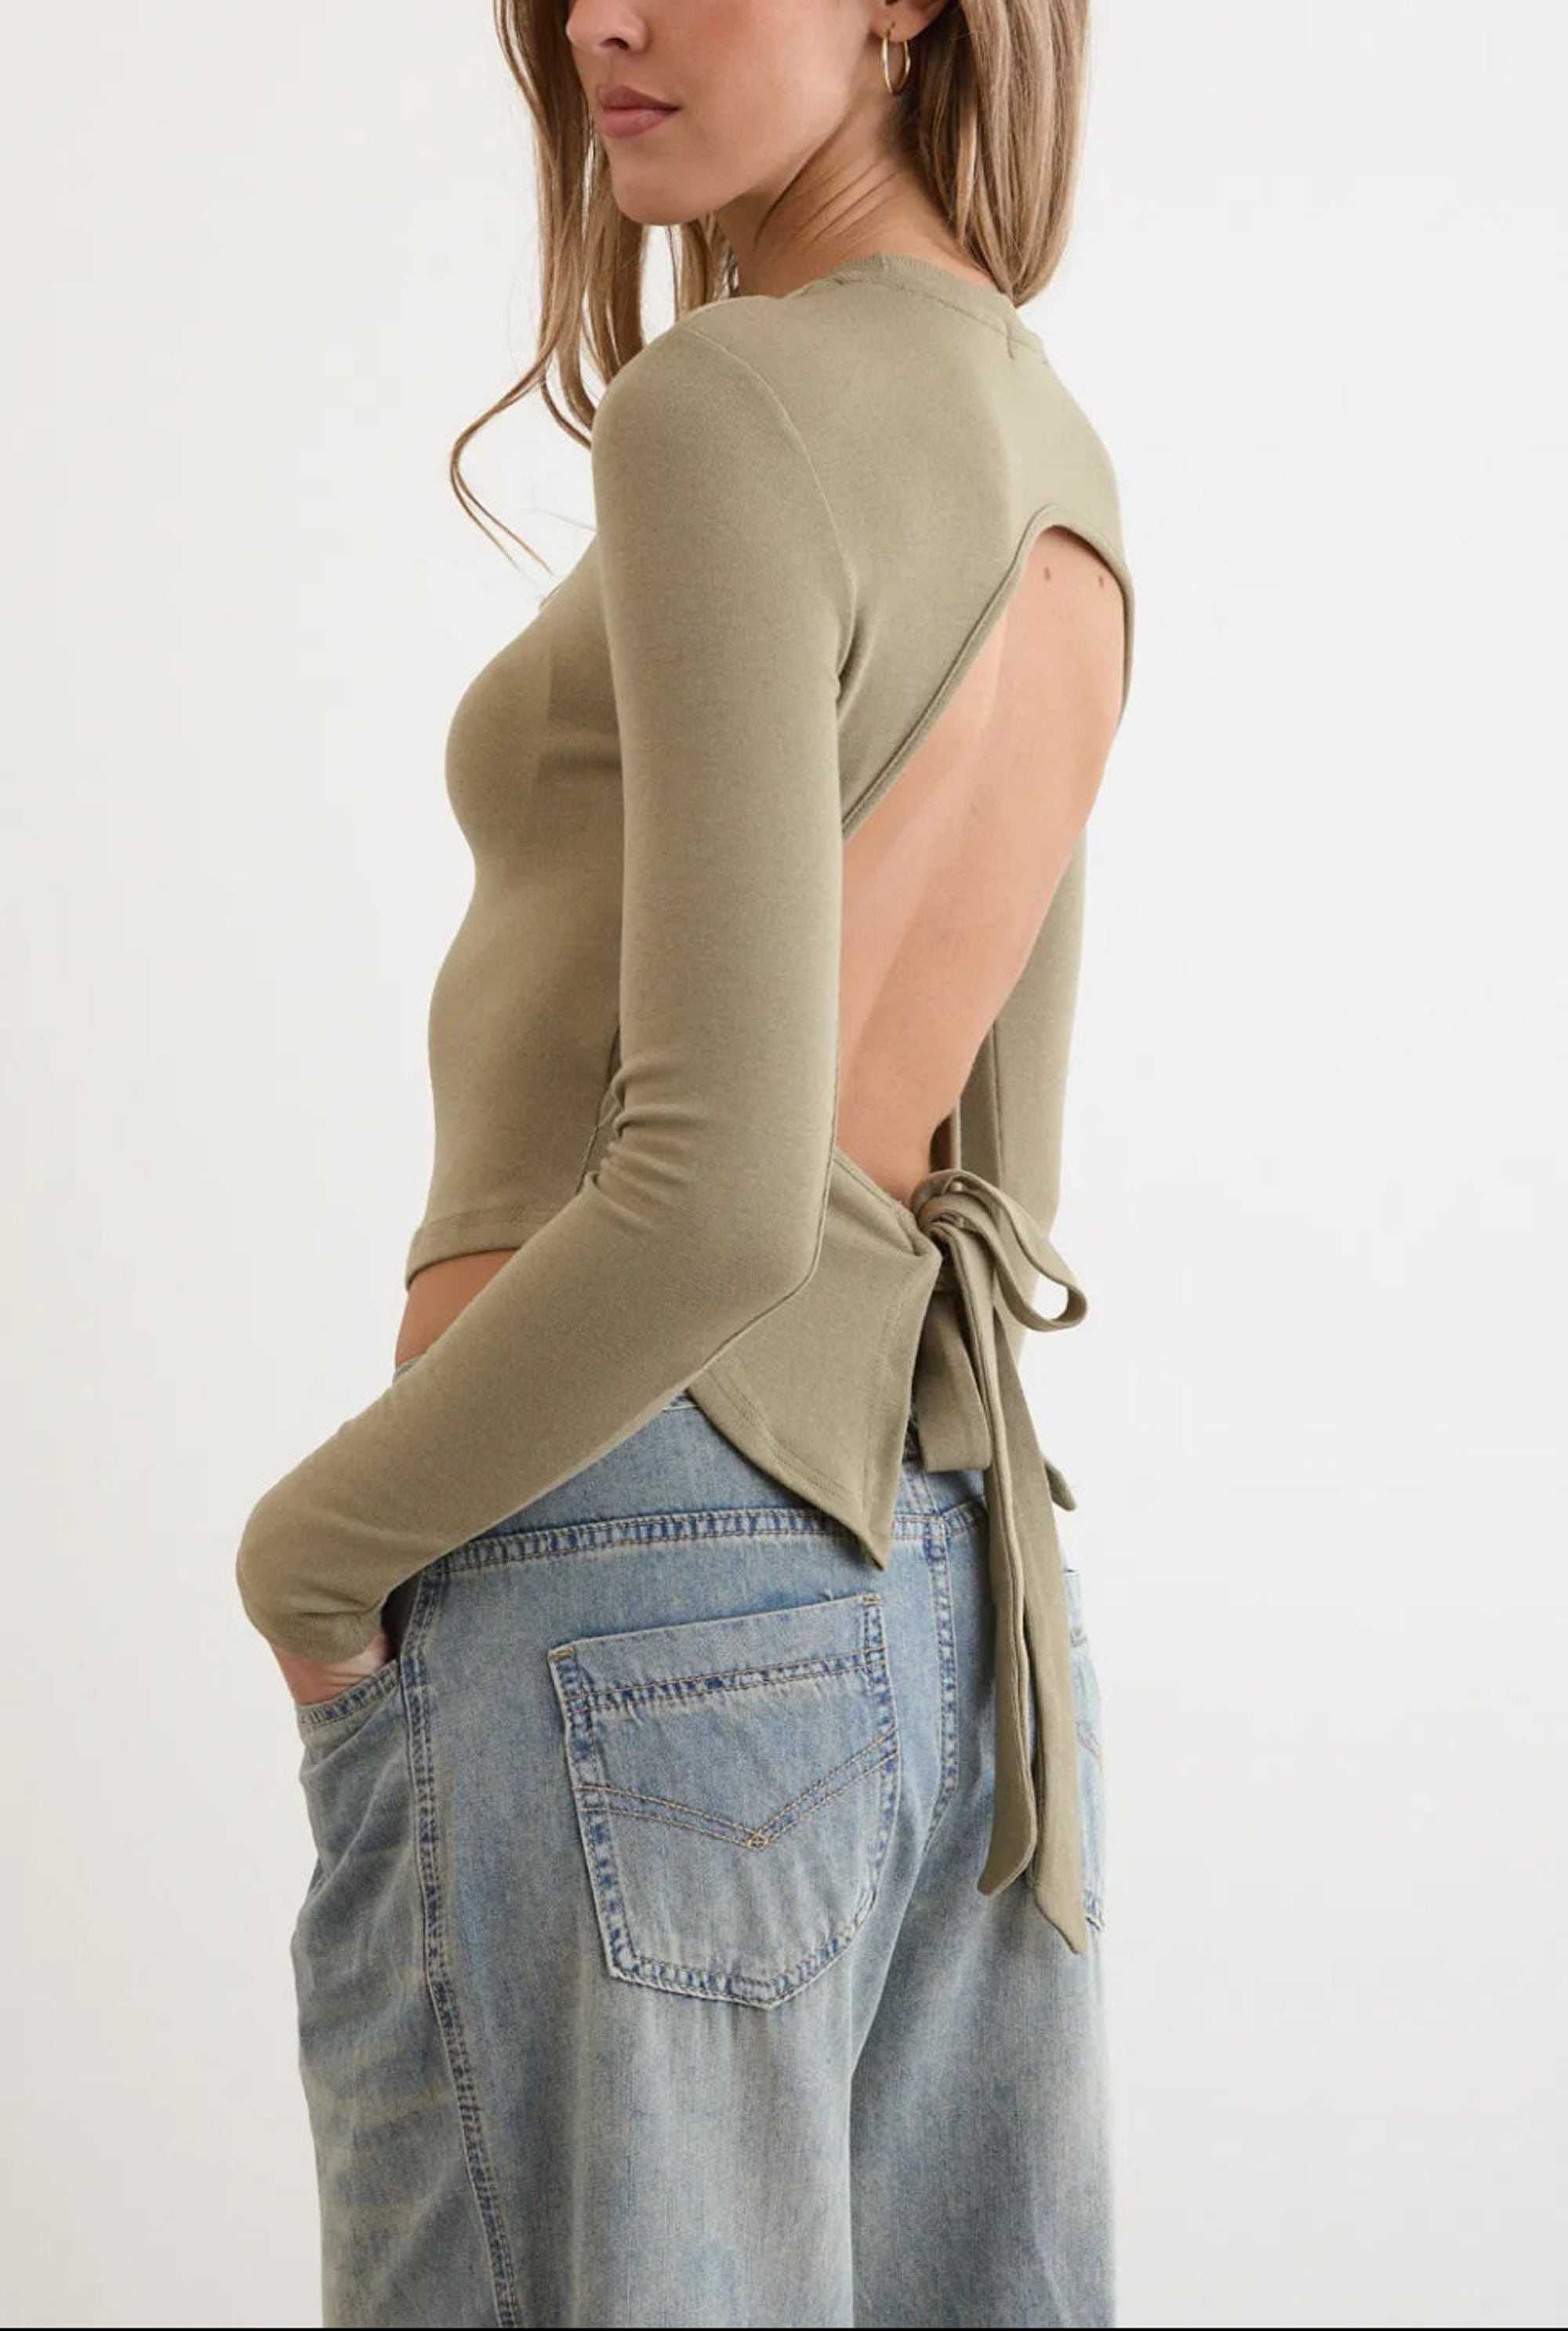 Clever Alice Backless Long-Sleeve in Sage - clever alice